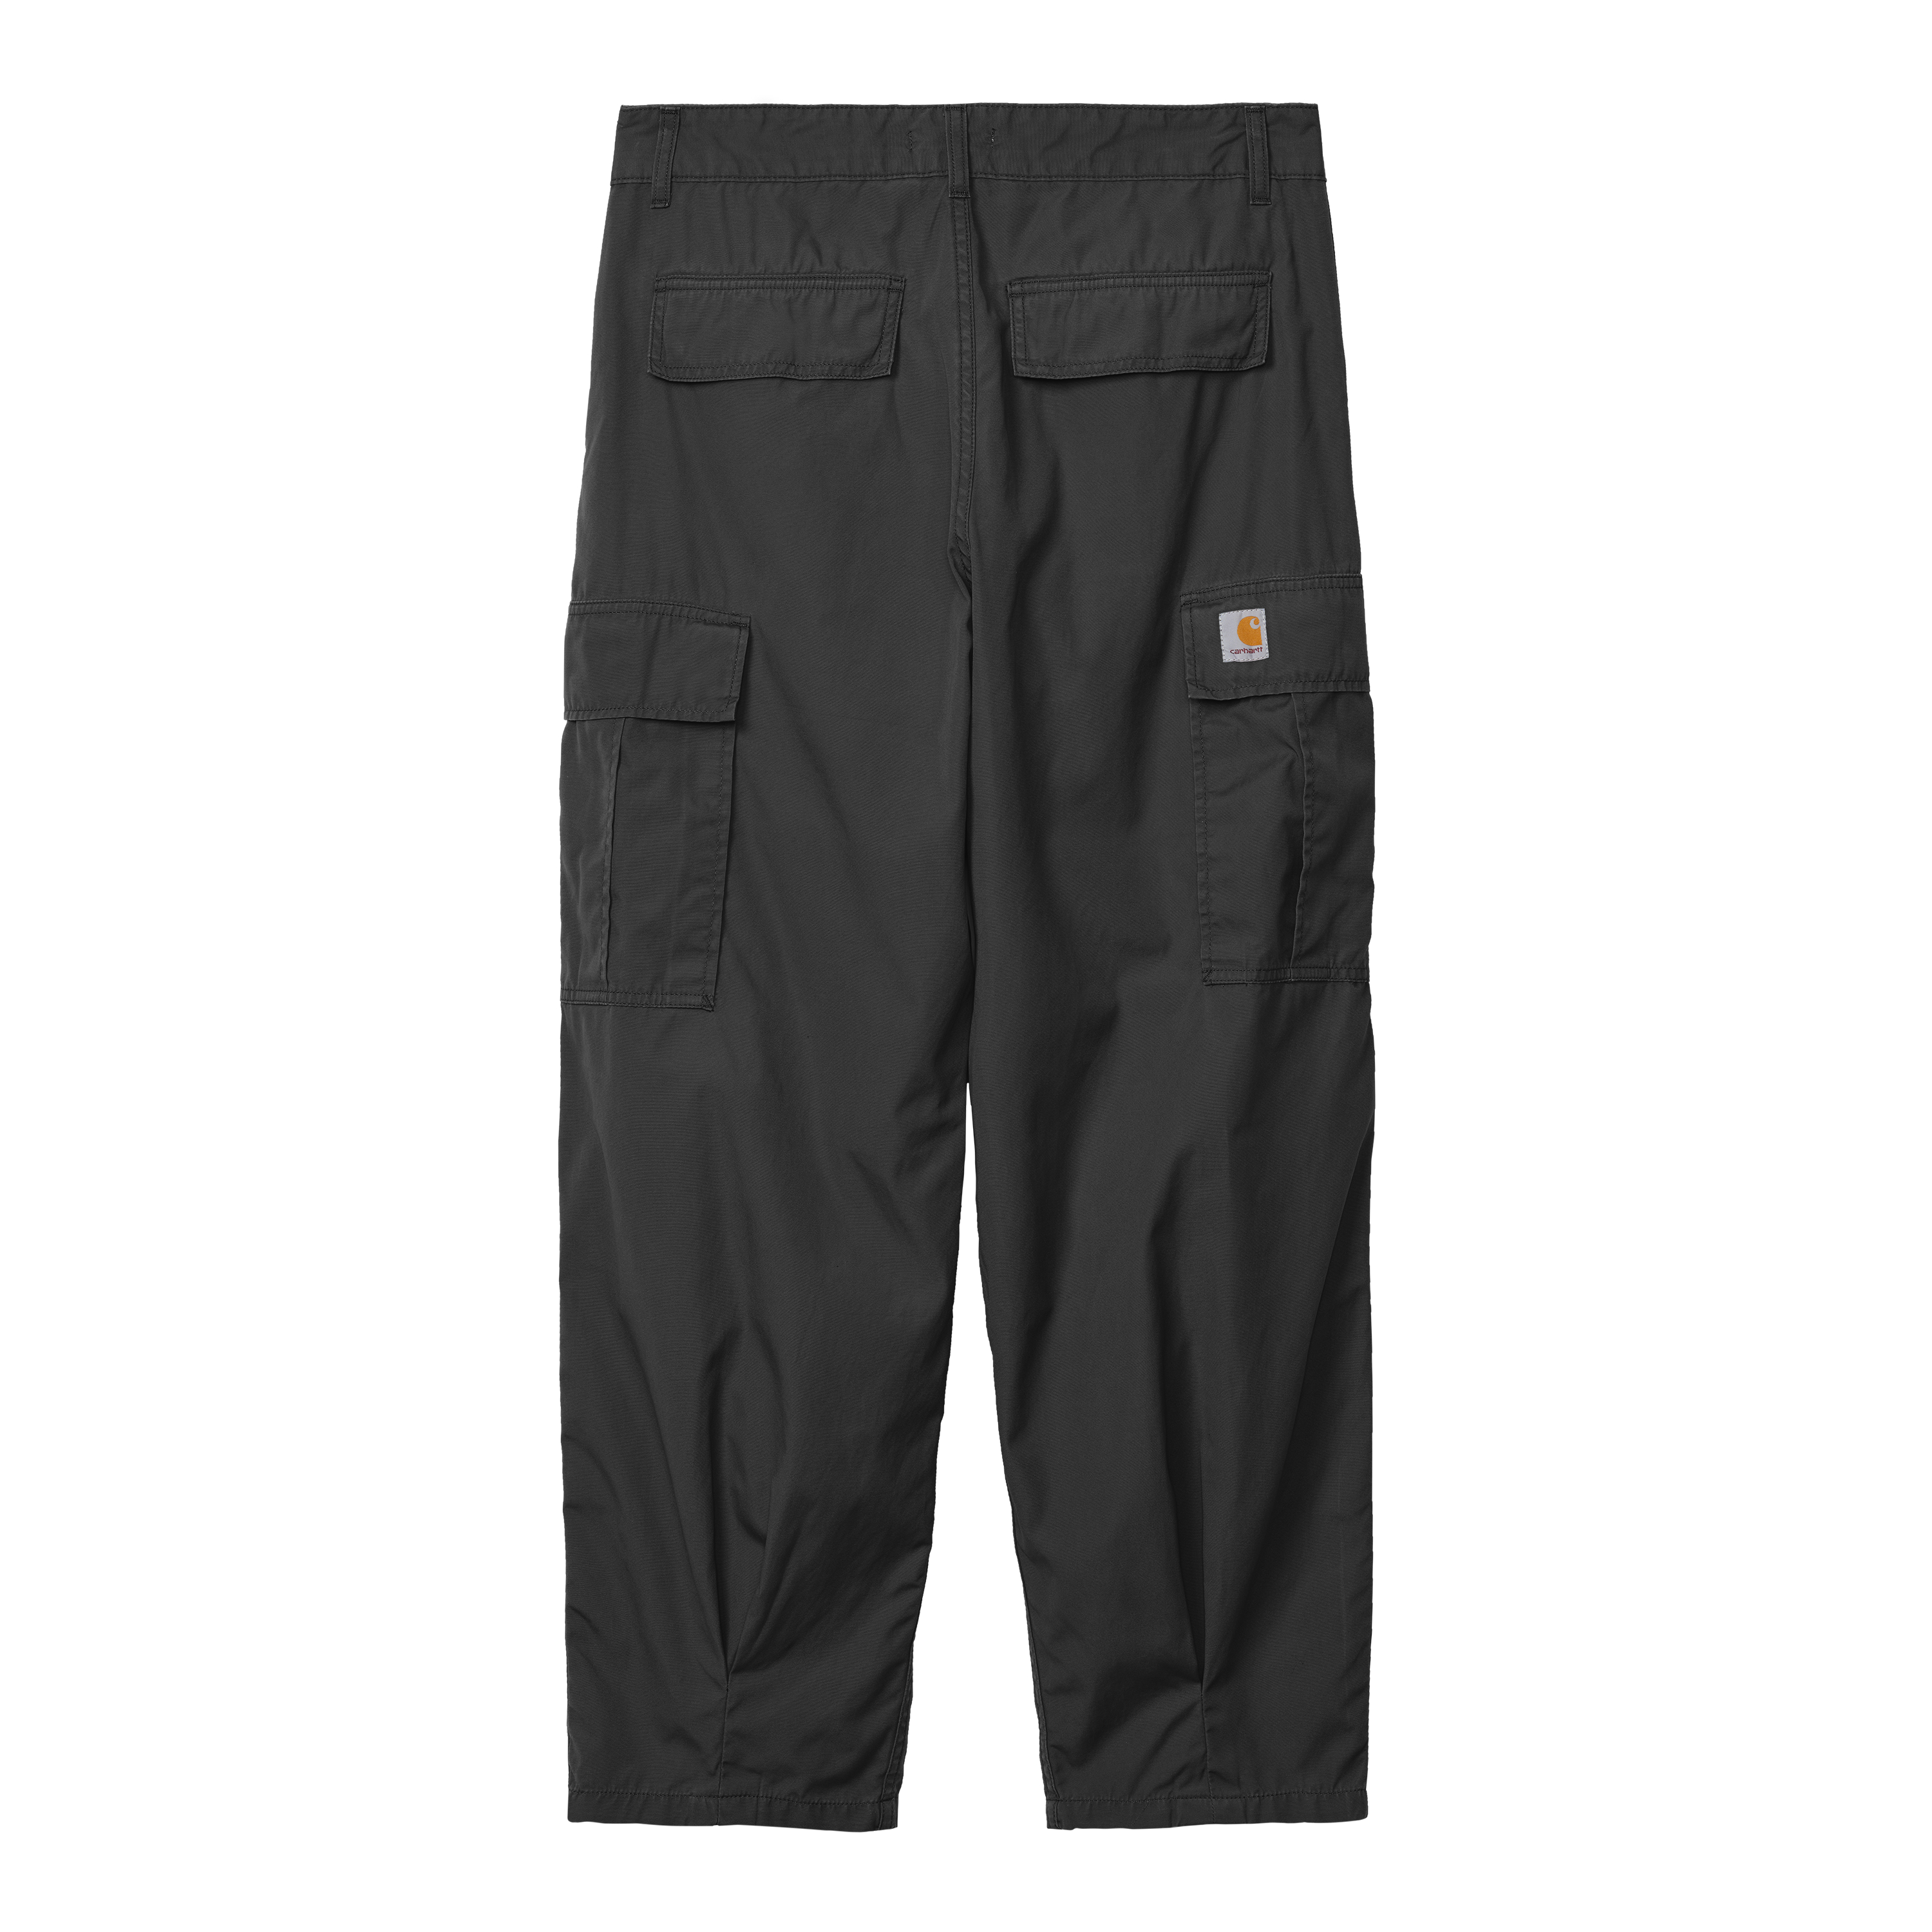 https://i1.adis.ws/i/carhartt_wip/I031218_89_GD-ST-01/cole-cargo-pant-black-garment-dyed-128.png?$facebook$